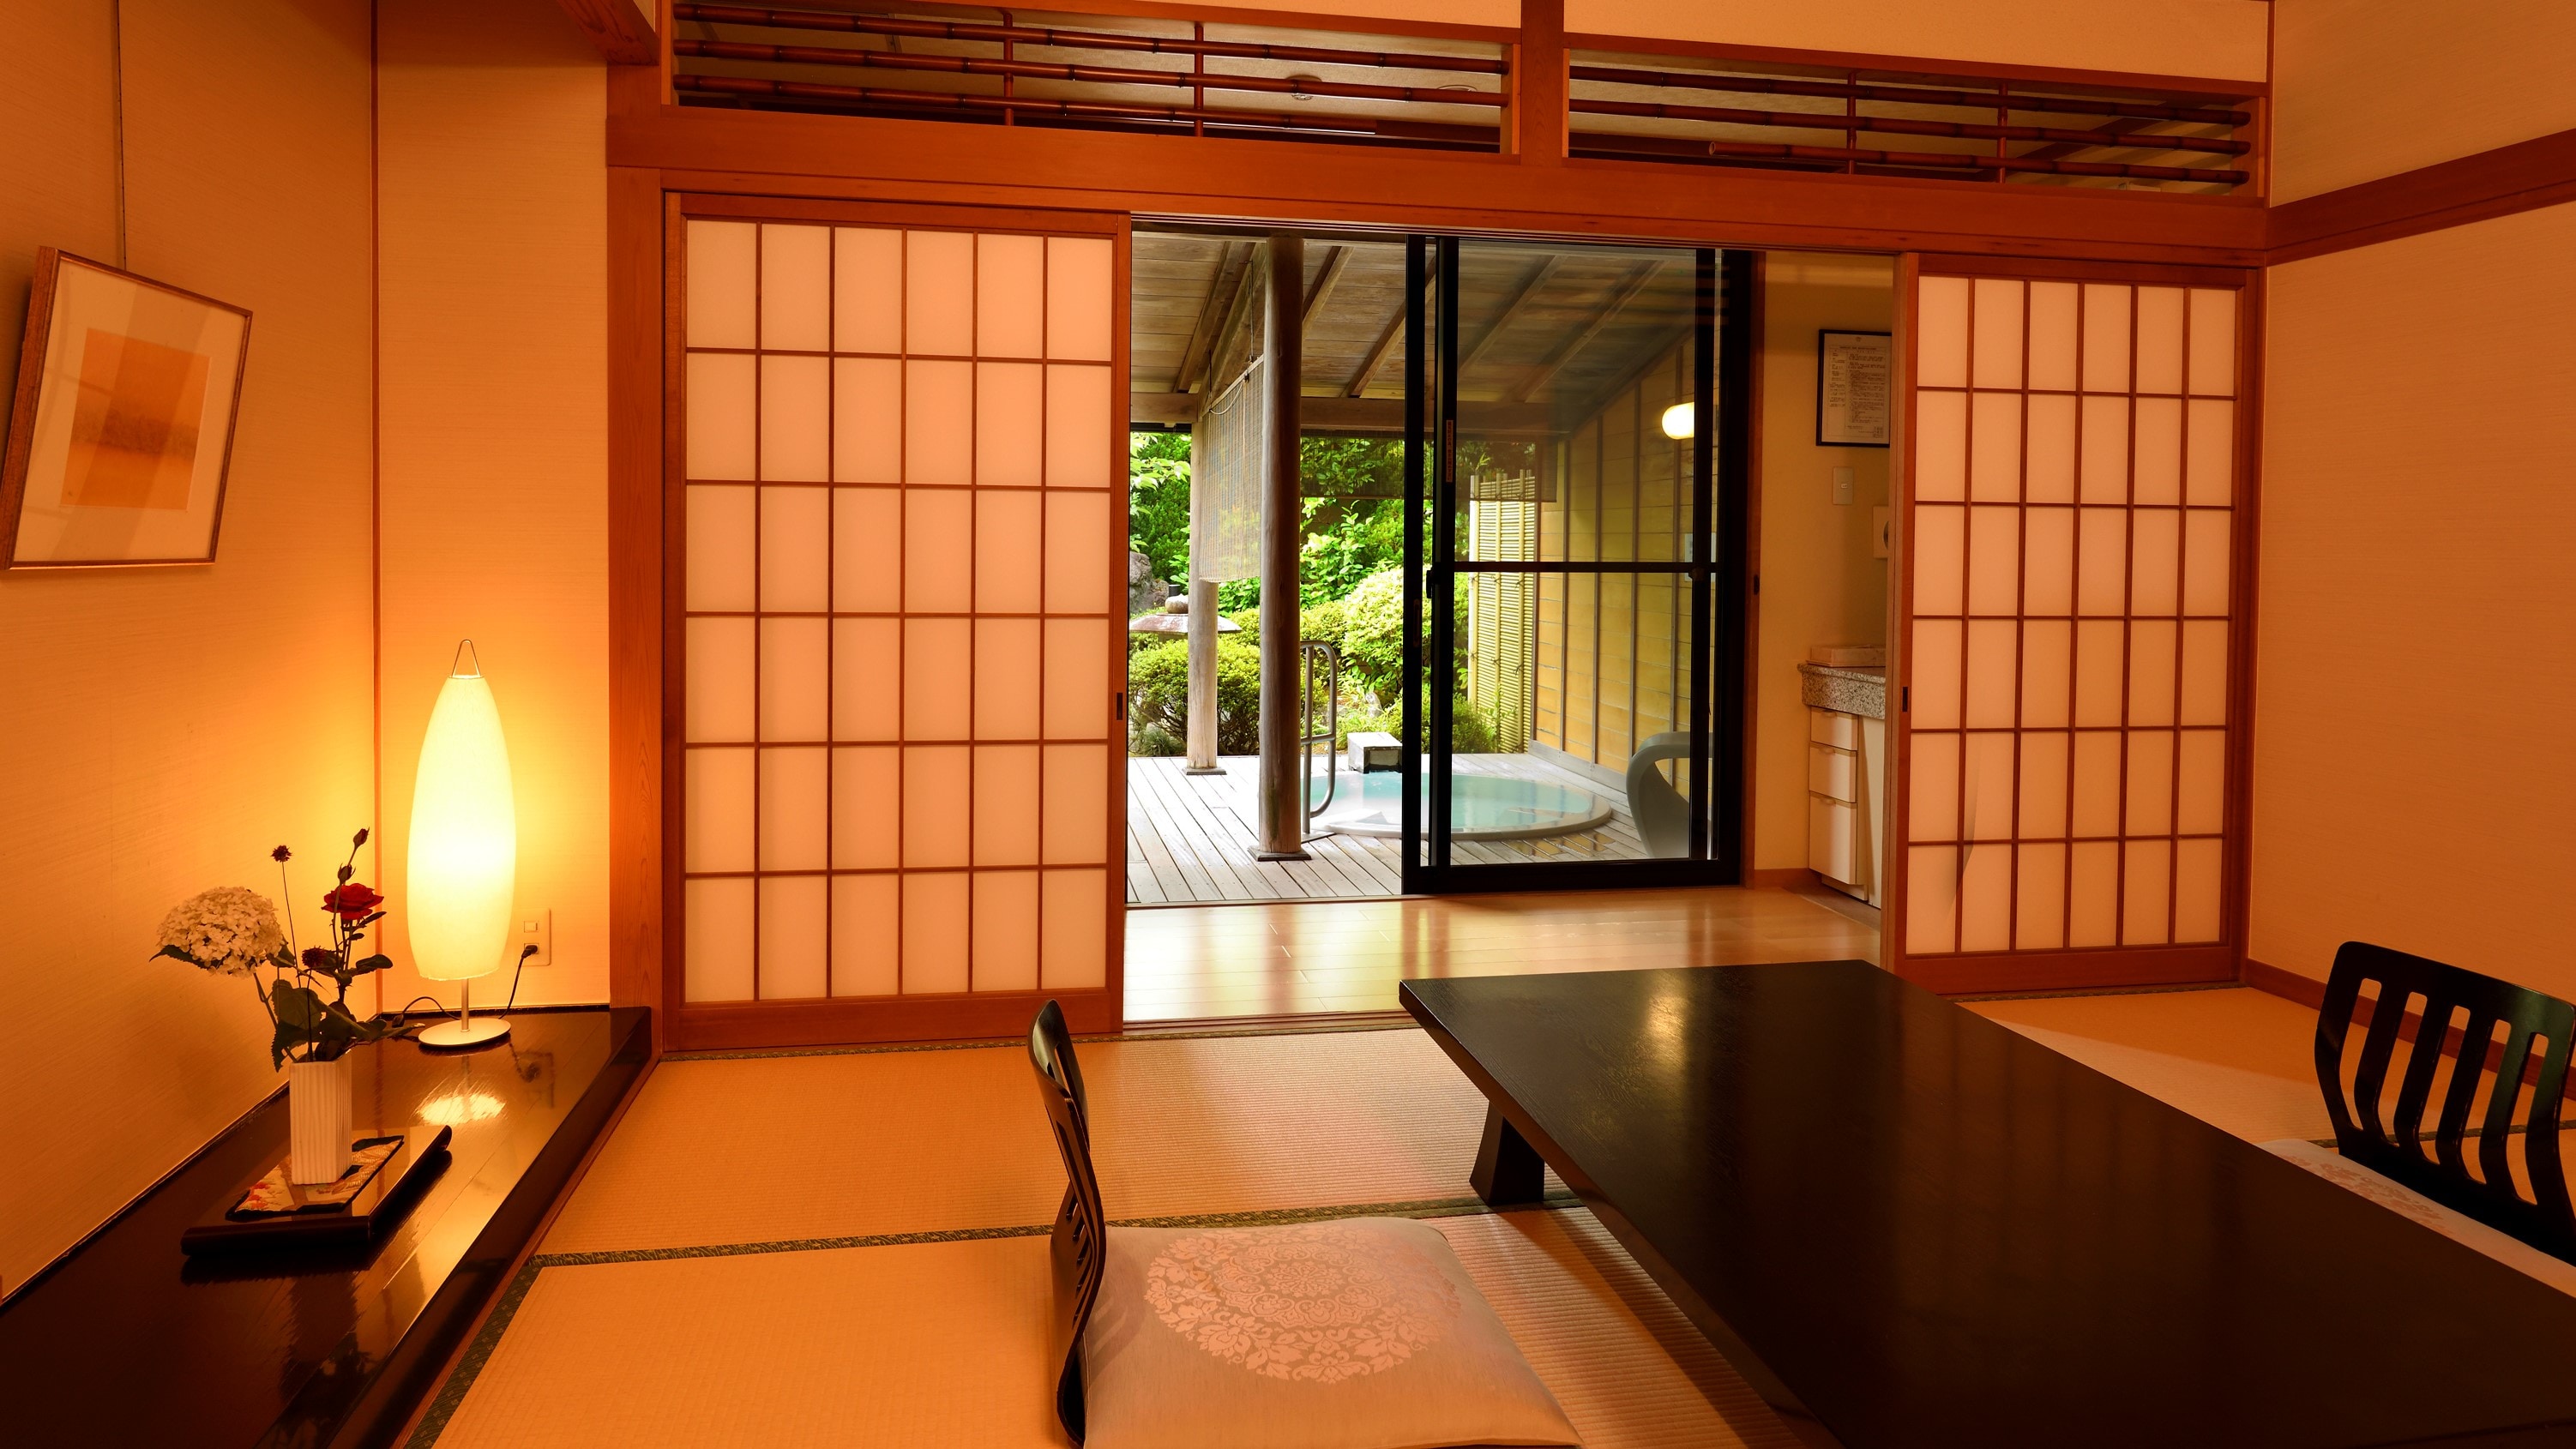 [Main building] Spend a relaxing time in the open-air bath in the guest room with 8 tatami mats.